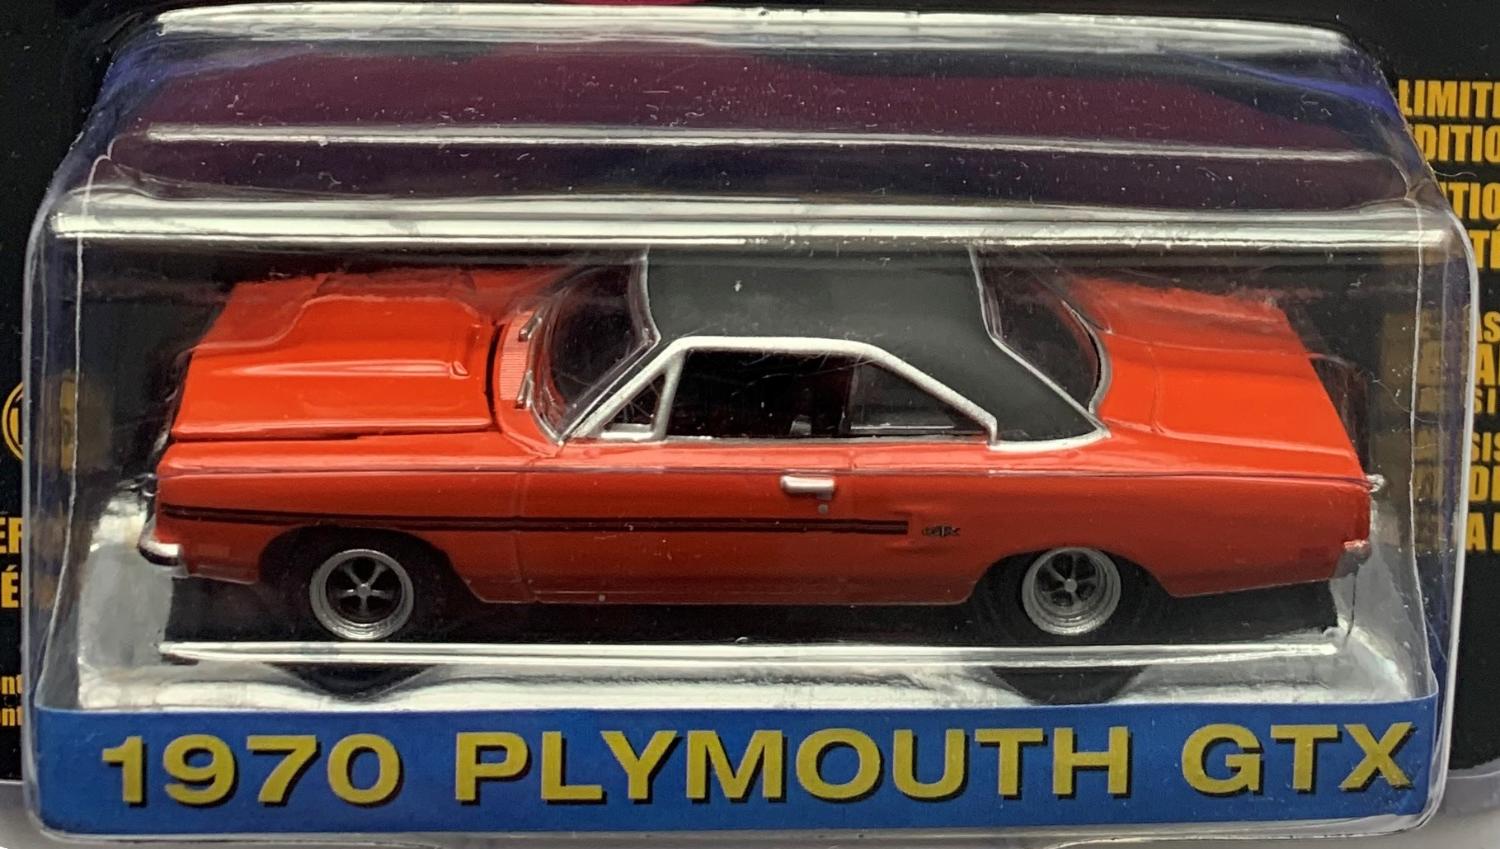 From the TV show ' The Mod Squad' 1970 Plymouth GTX in red 1:64 scale model from Greenlight Hollywood, series 29, limited edition model